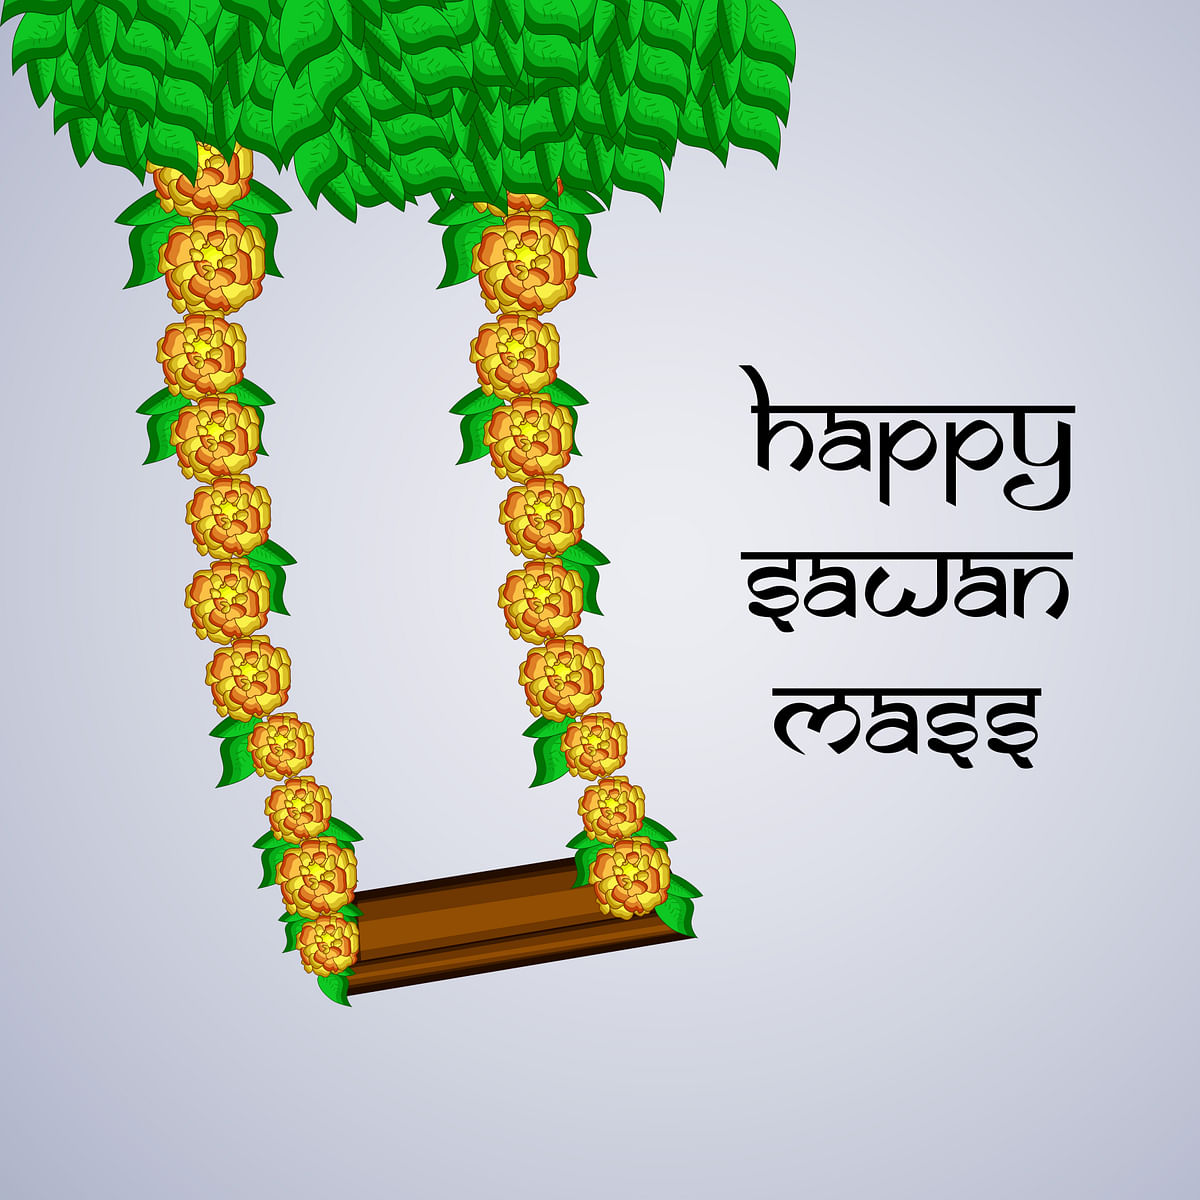 Here are some images, quotes, messages for you to send your friends, relatives & peers a Happy Sawan Somwar.